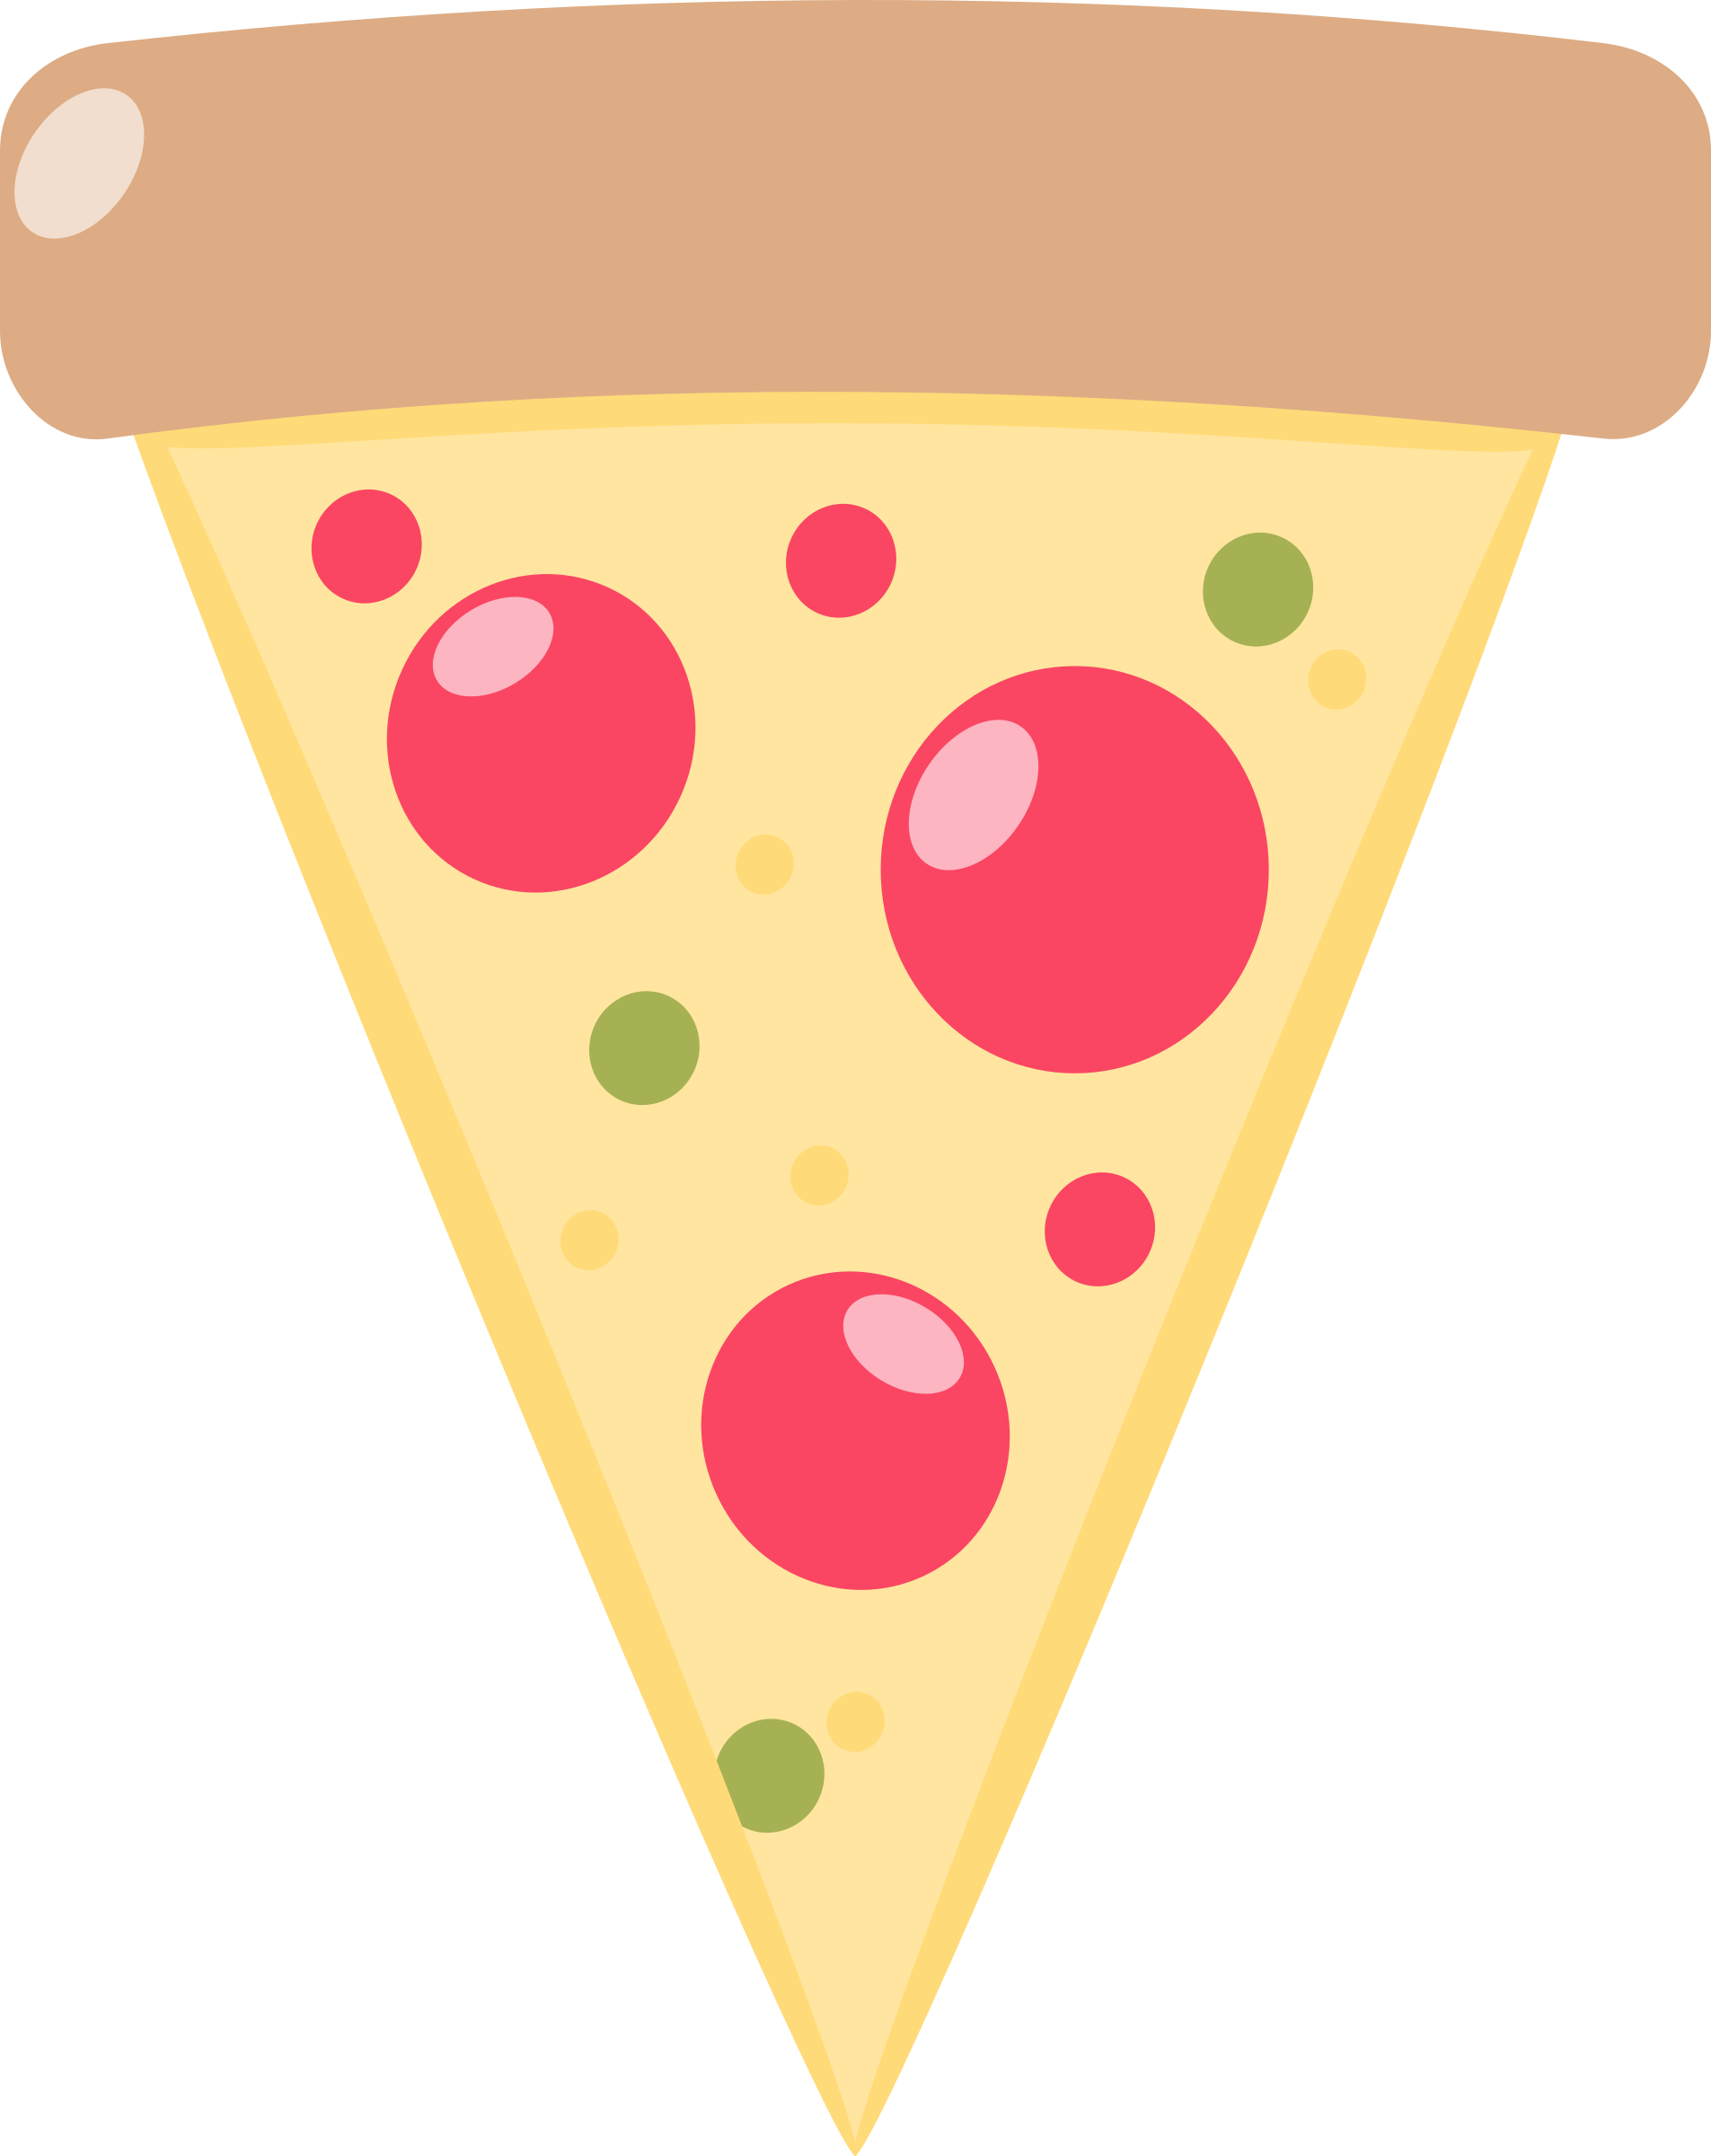 Pizza clipart free download on WebStockReview